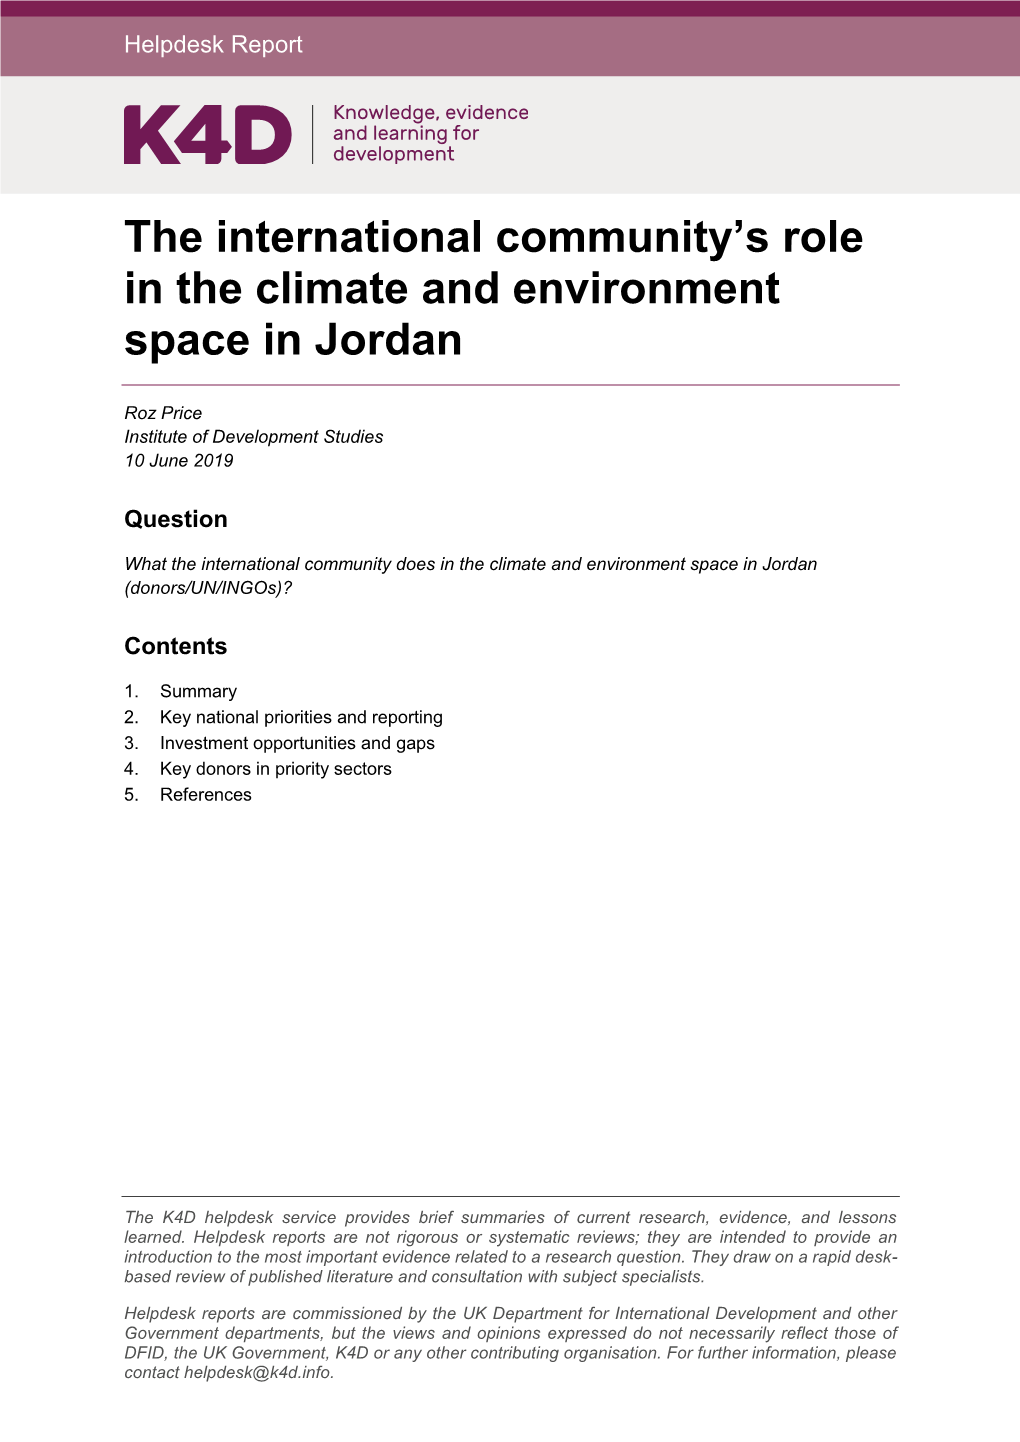 The International Community's Role in the Climate and Environment Space